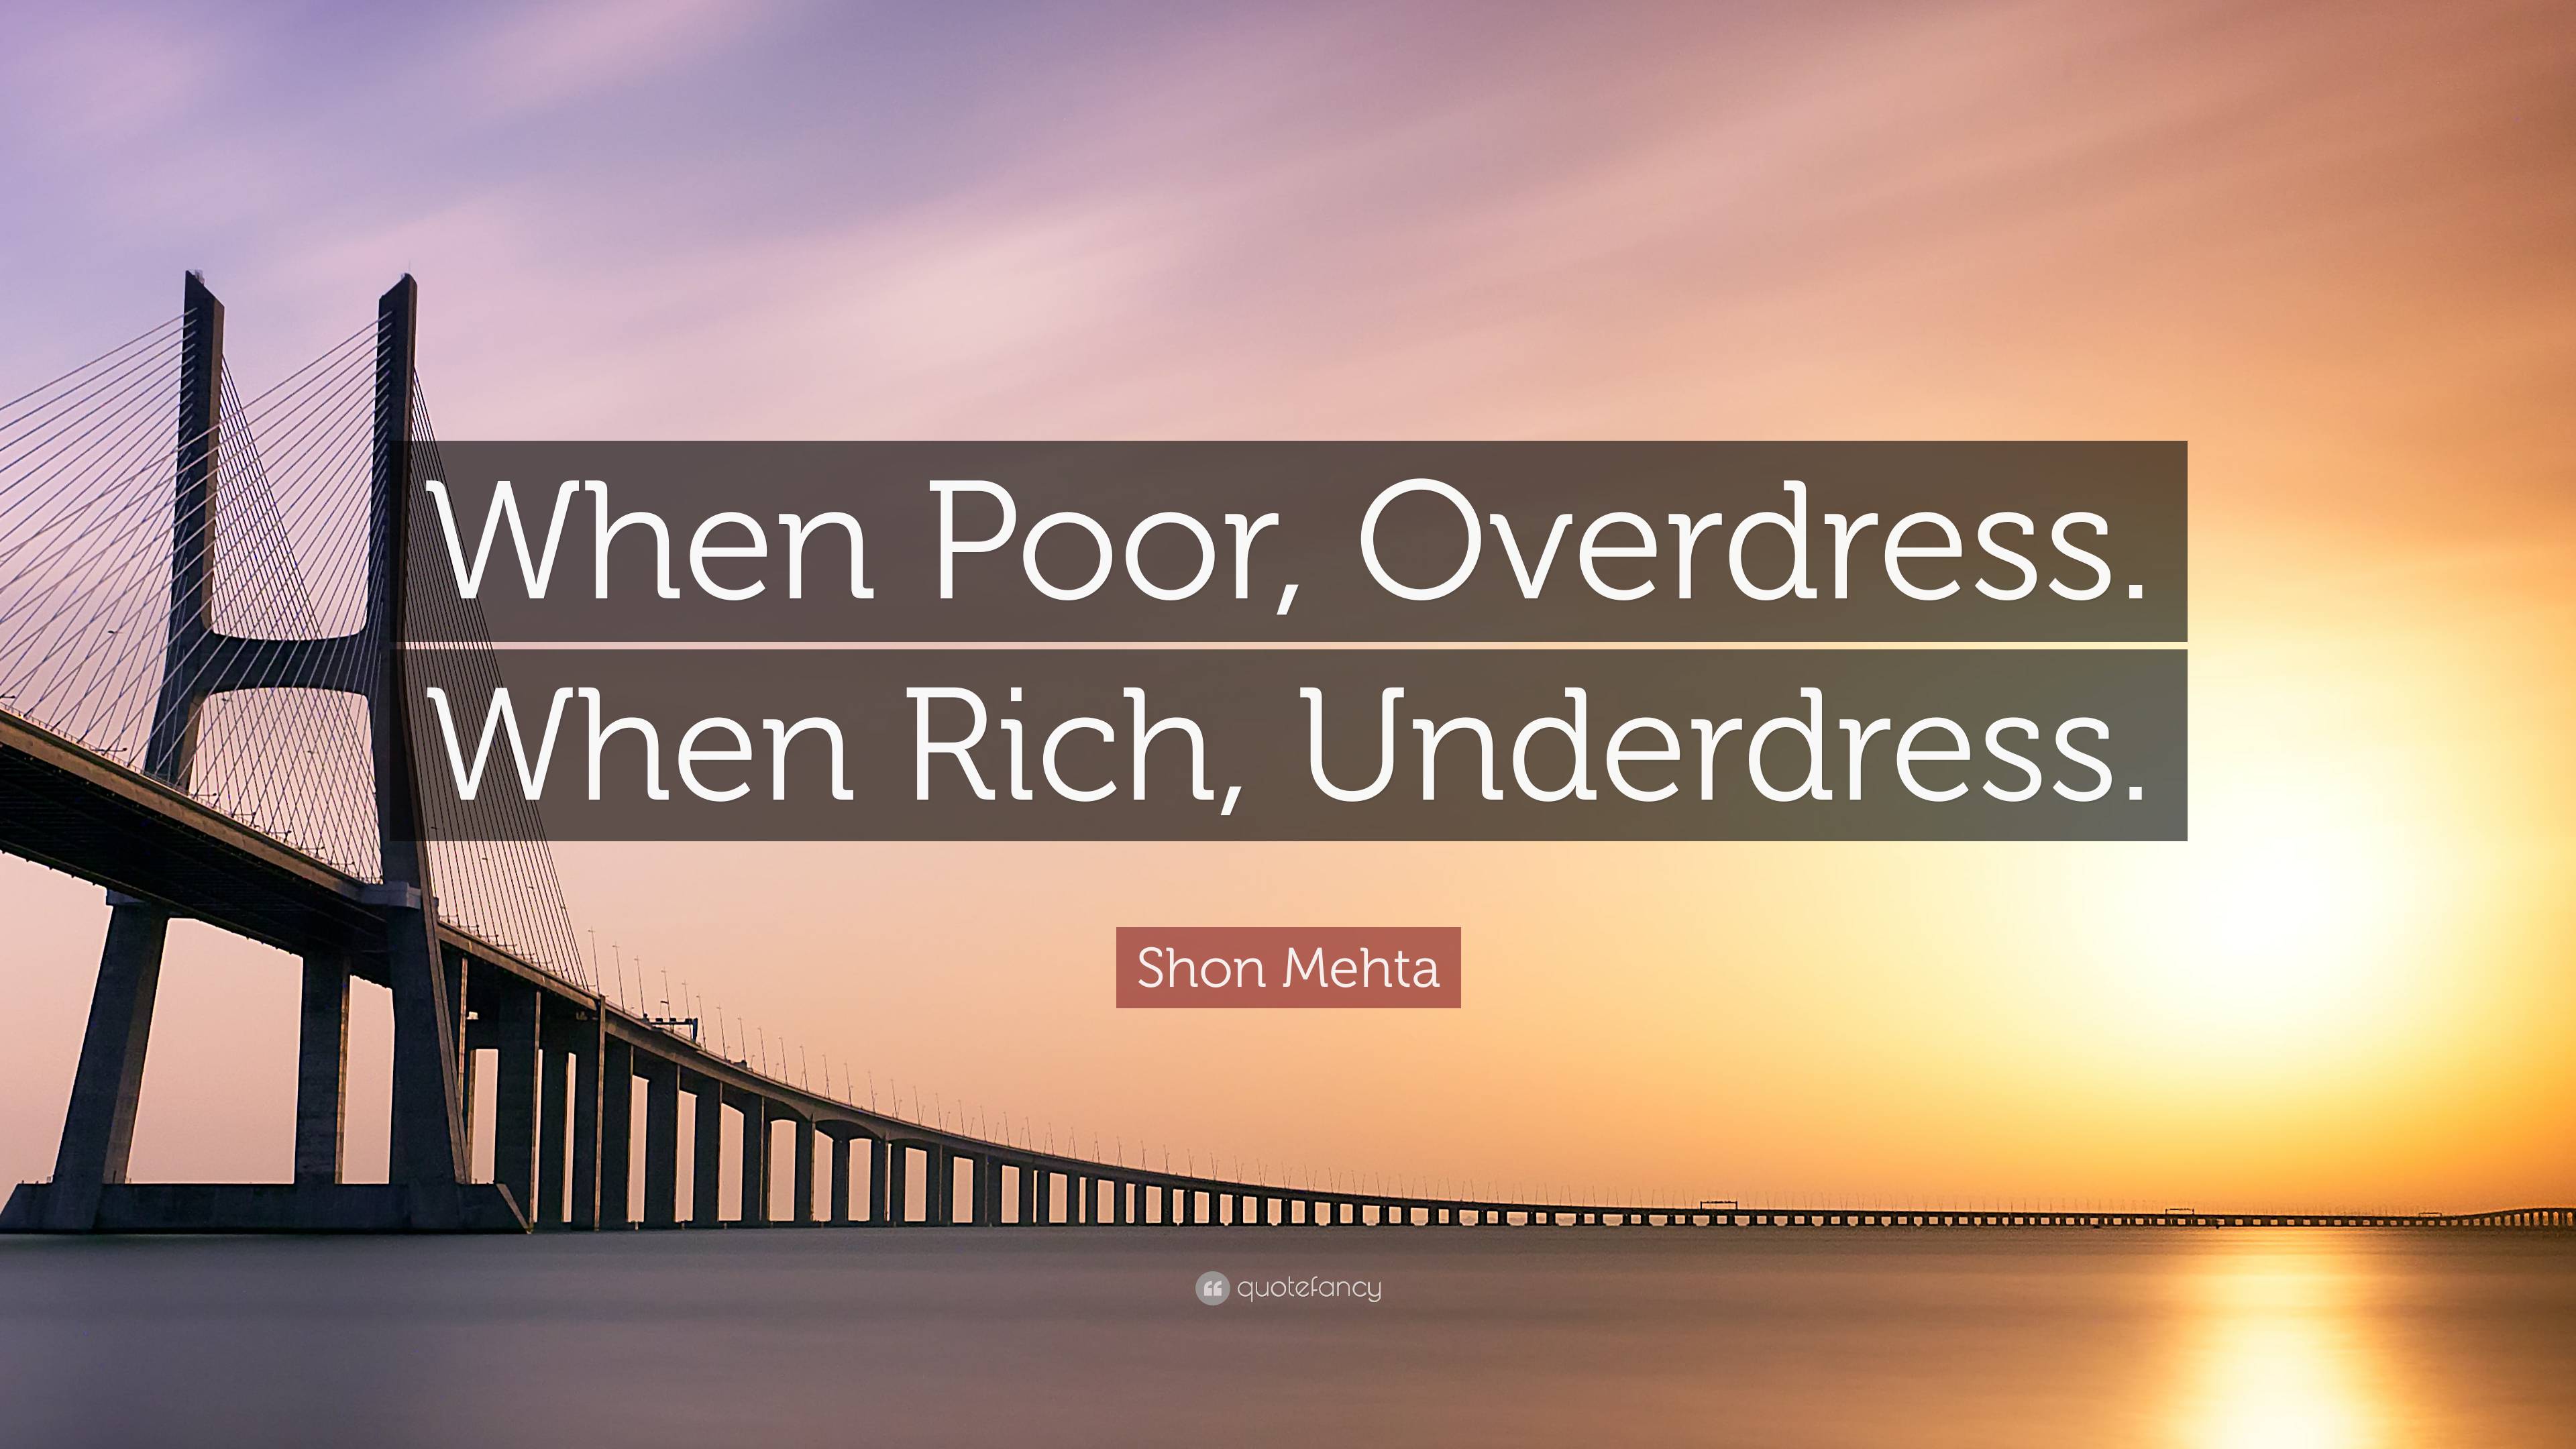 Shon Mehta Quote: “When Poor, Overdress. When Rich, Underdress.”